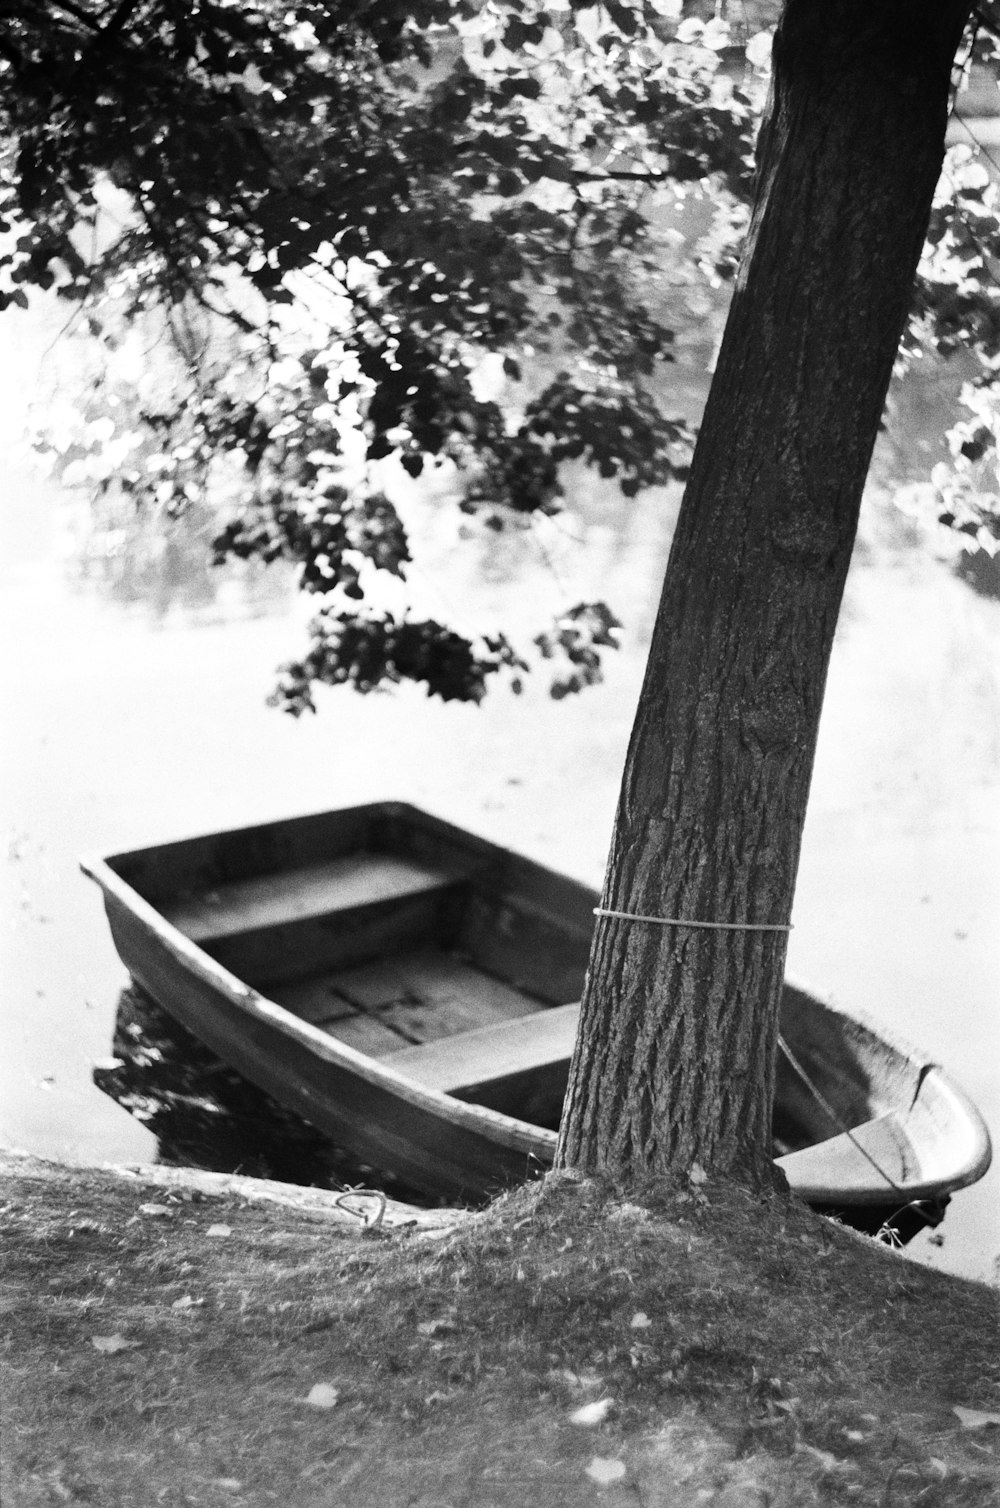 a small boat tied to a tree by the water